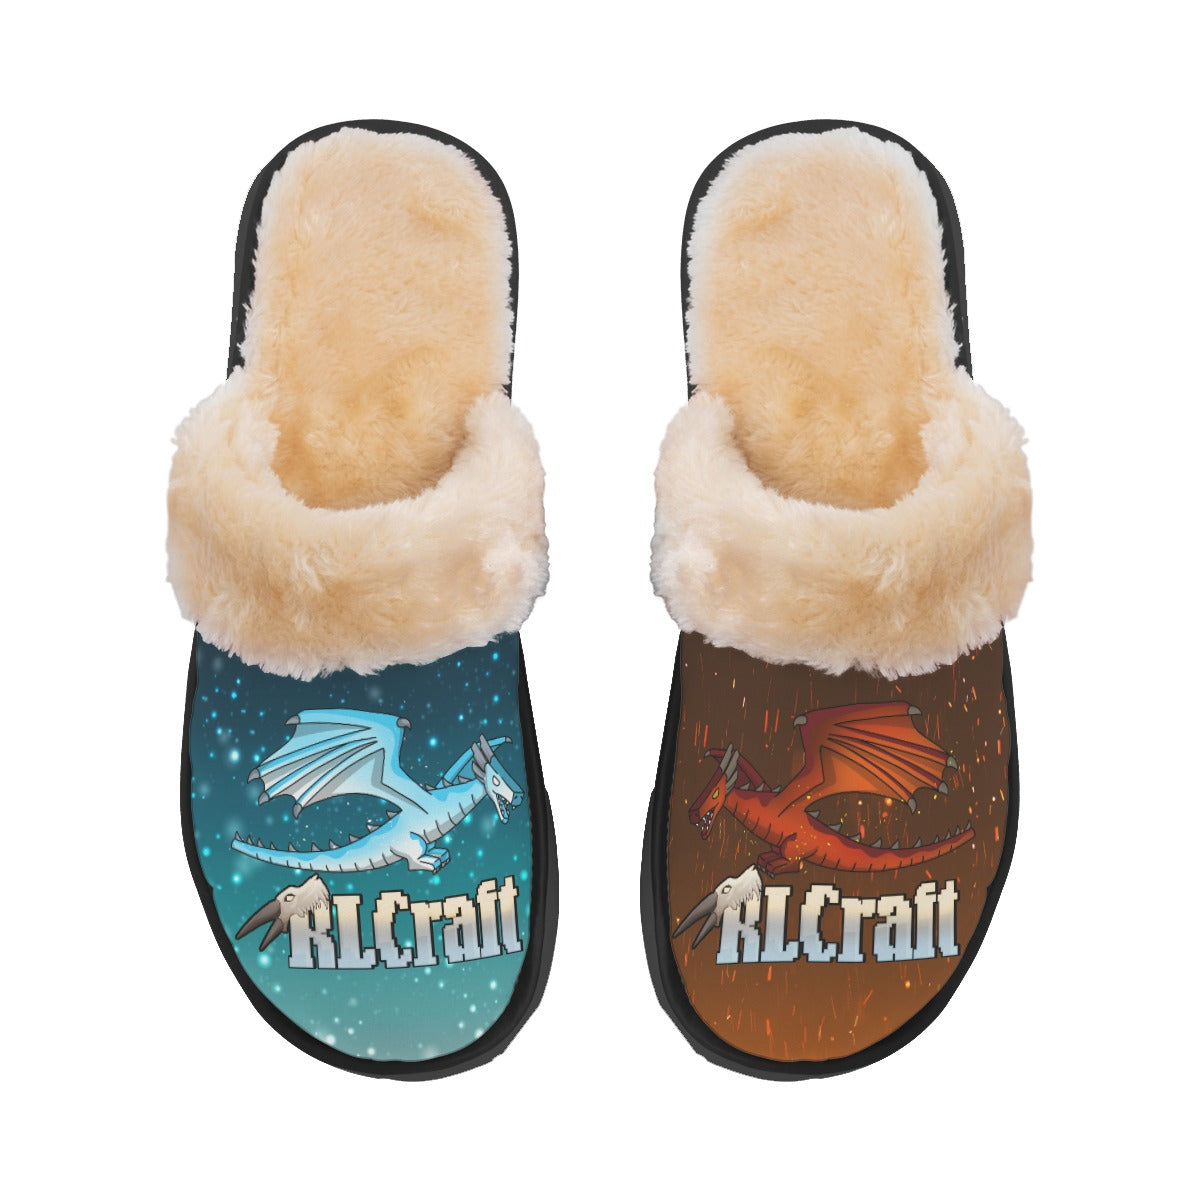 Women's Shivaxi RLCraft Slippers